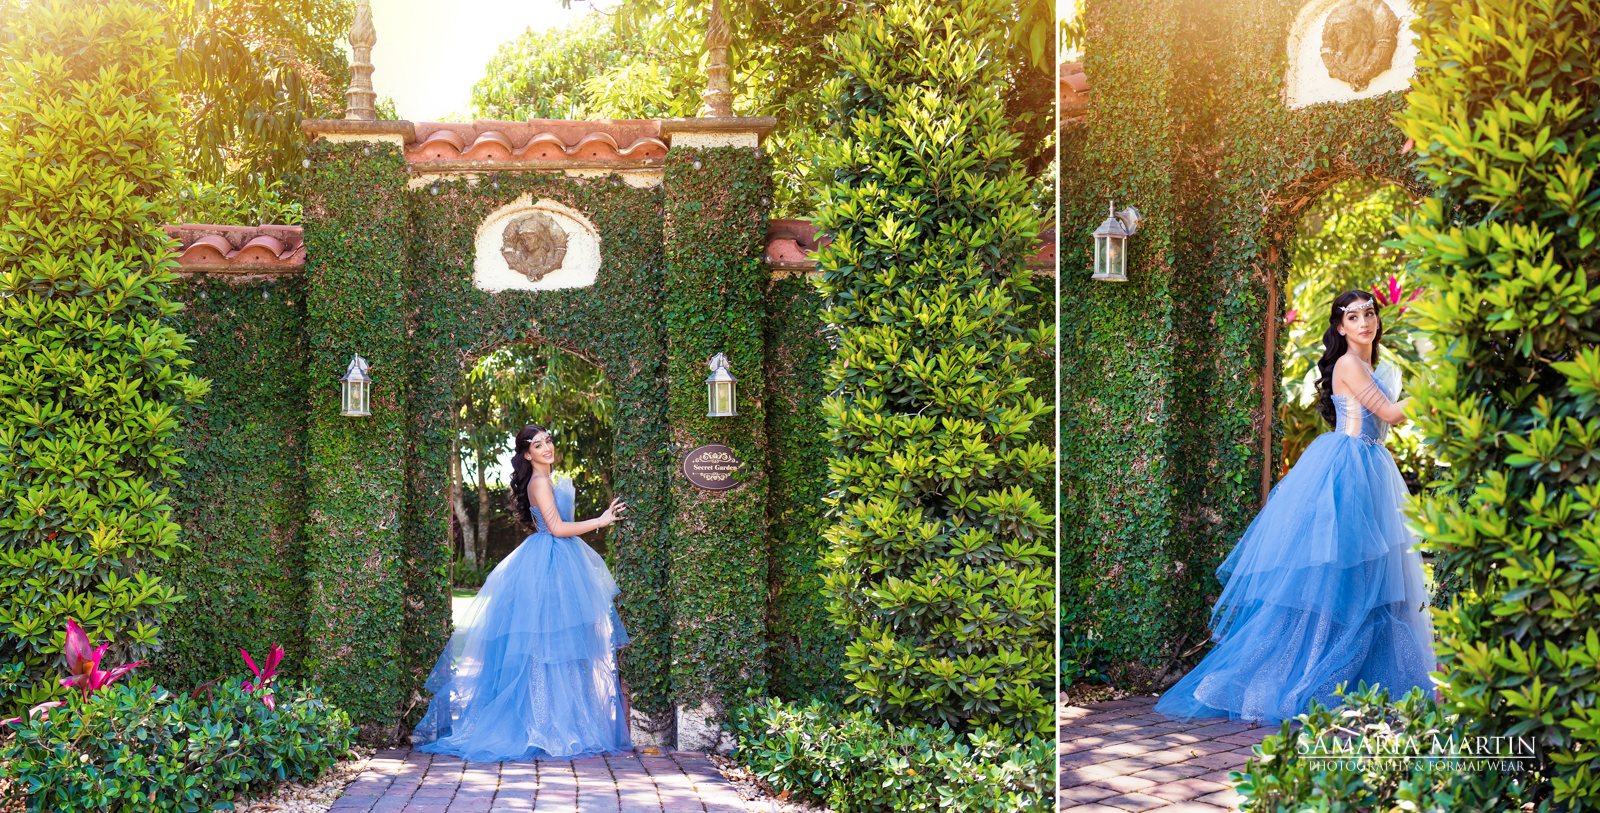 Princess inspired quince dresses